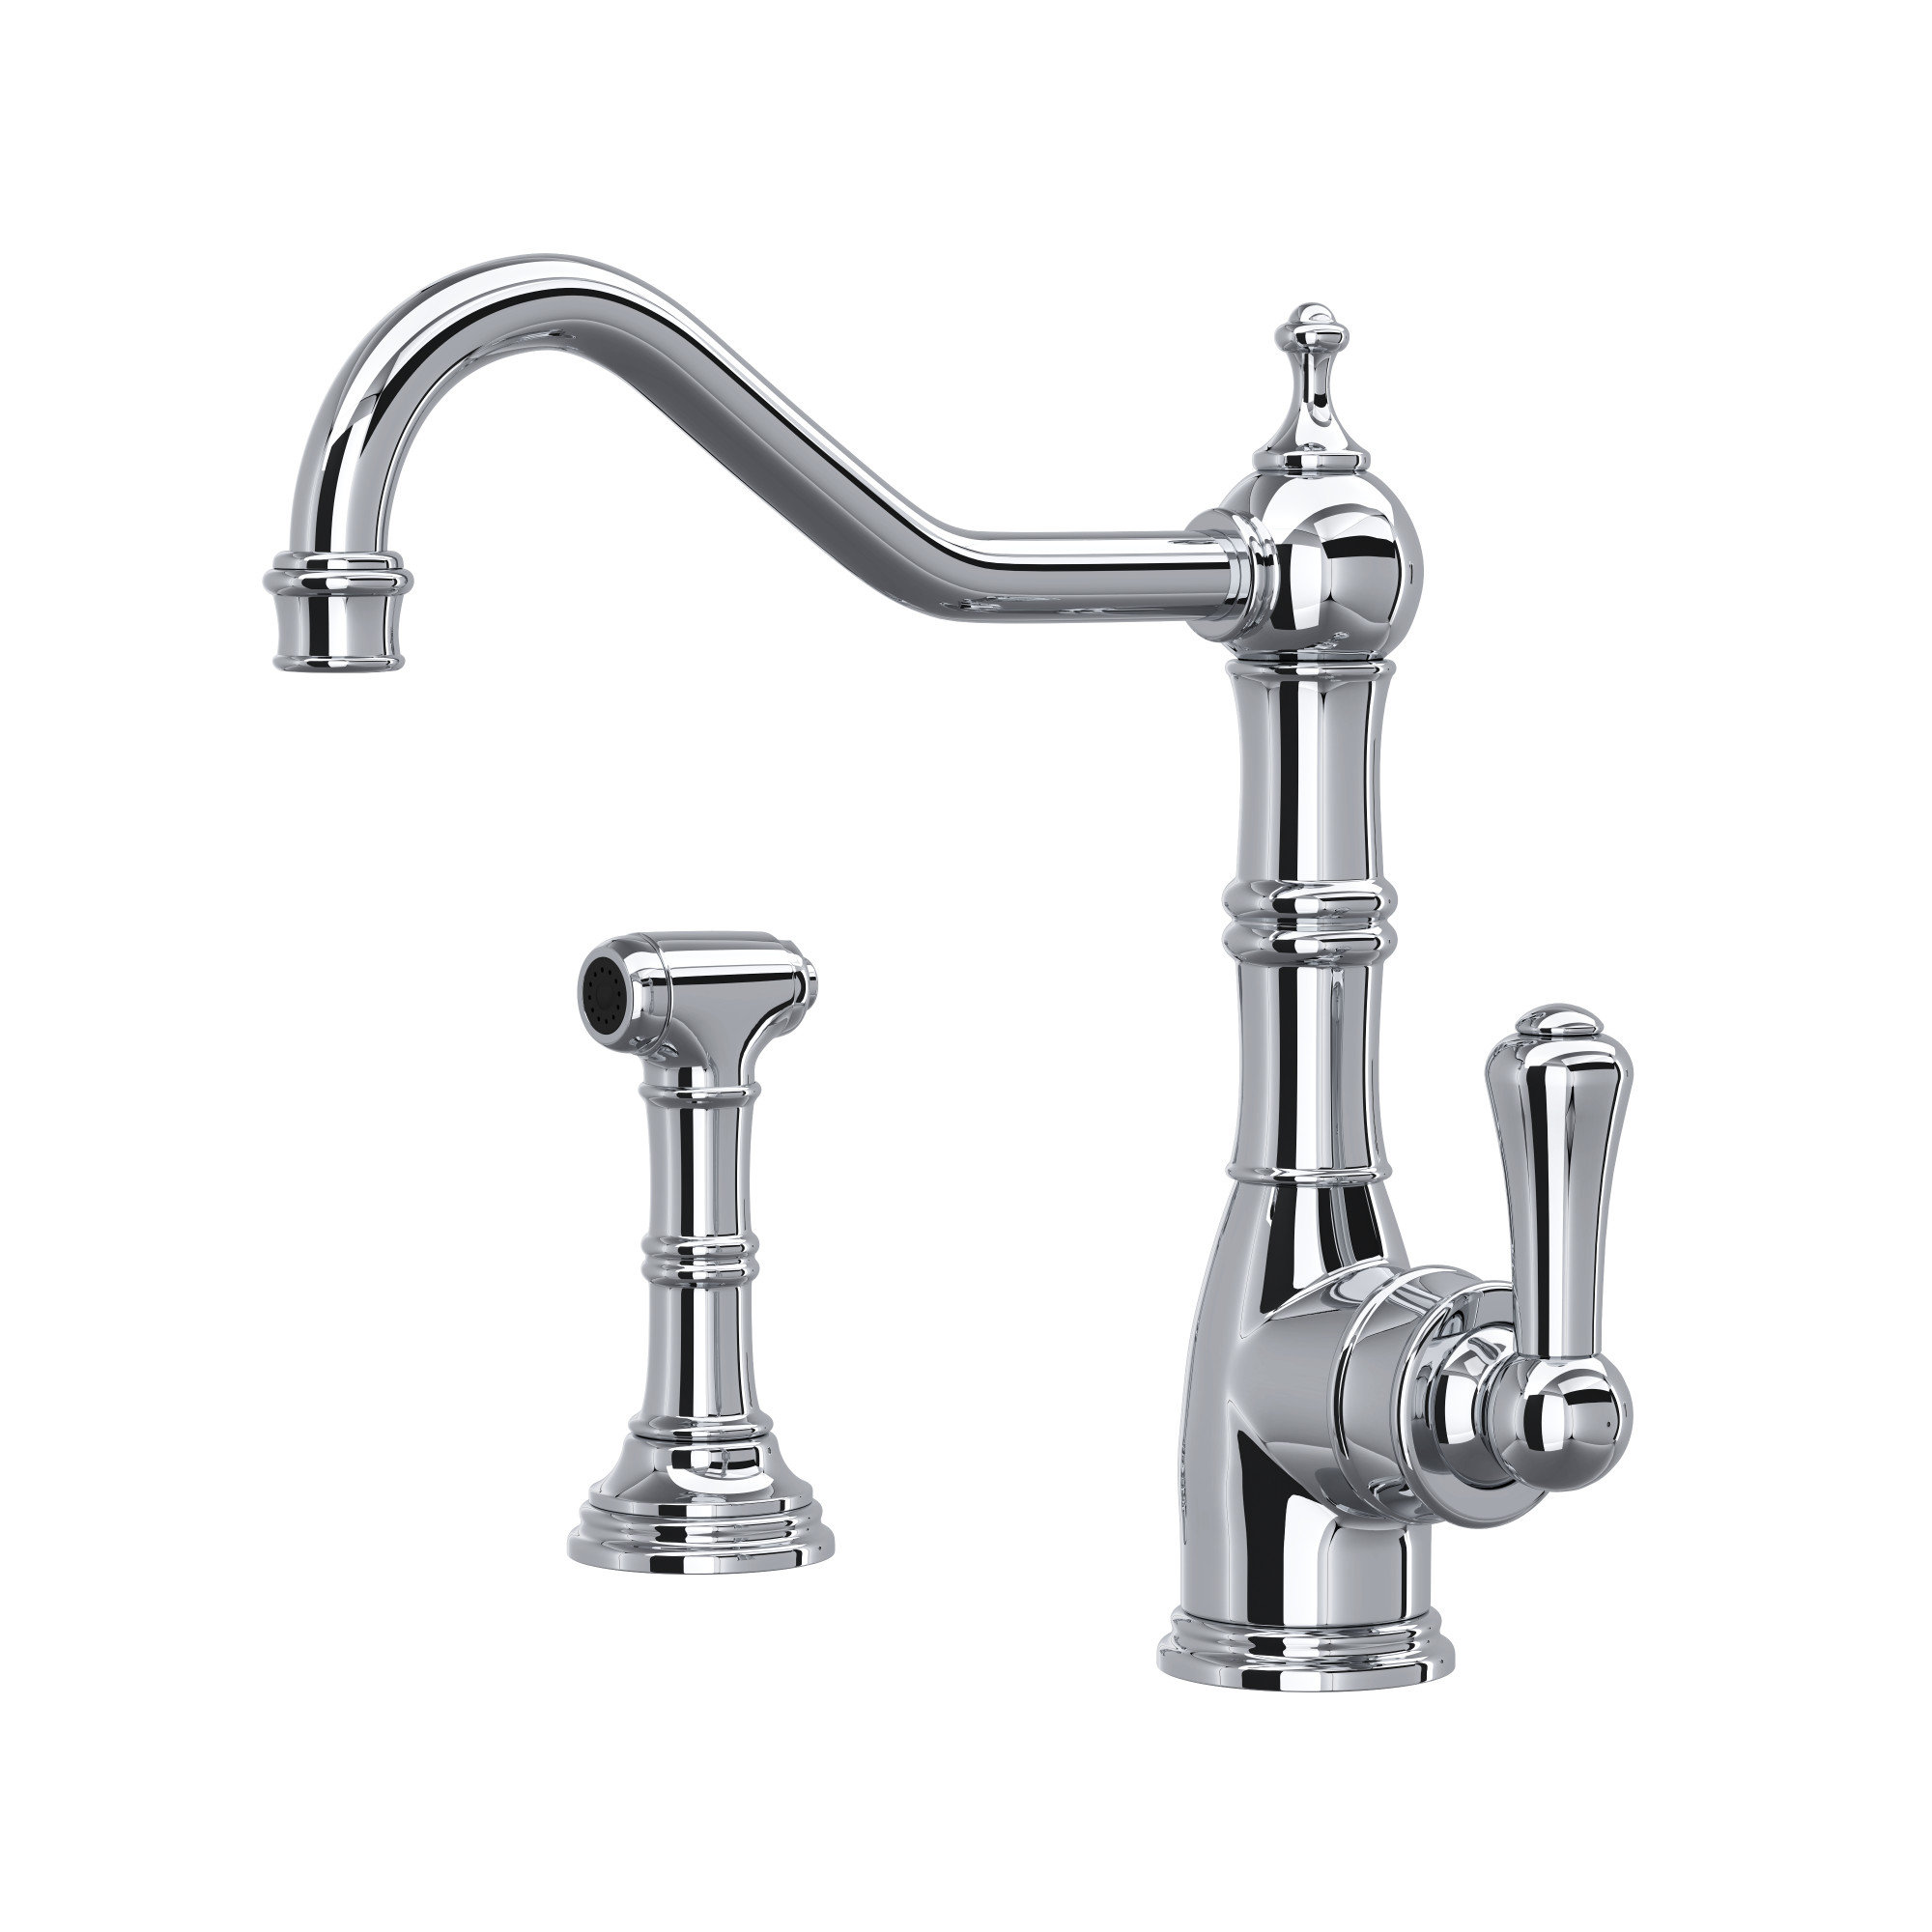 Perrin & Rowe Georgian Era Bridge Kitchen Faucet with Sidespray -  Unlacquered Brass with Metal Lever Handle